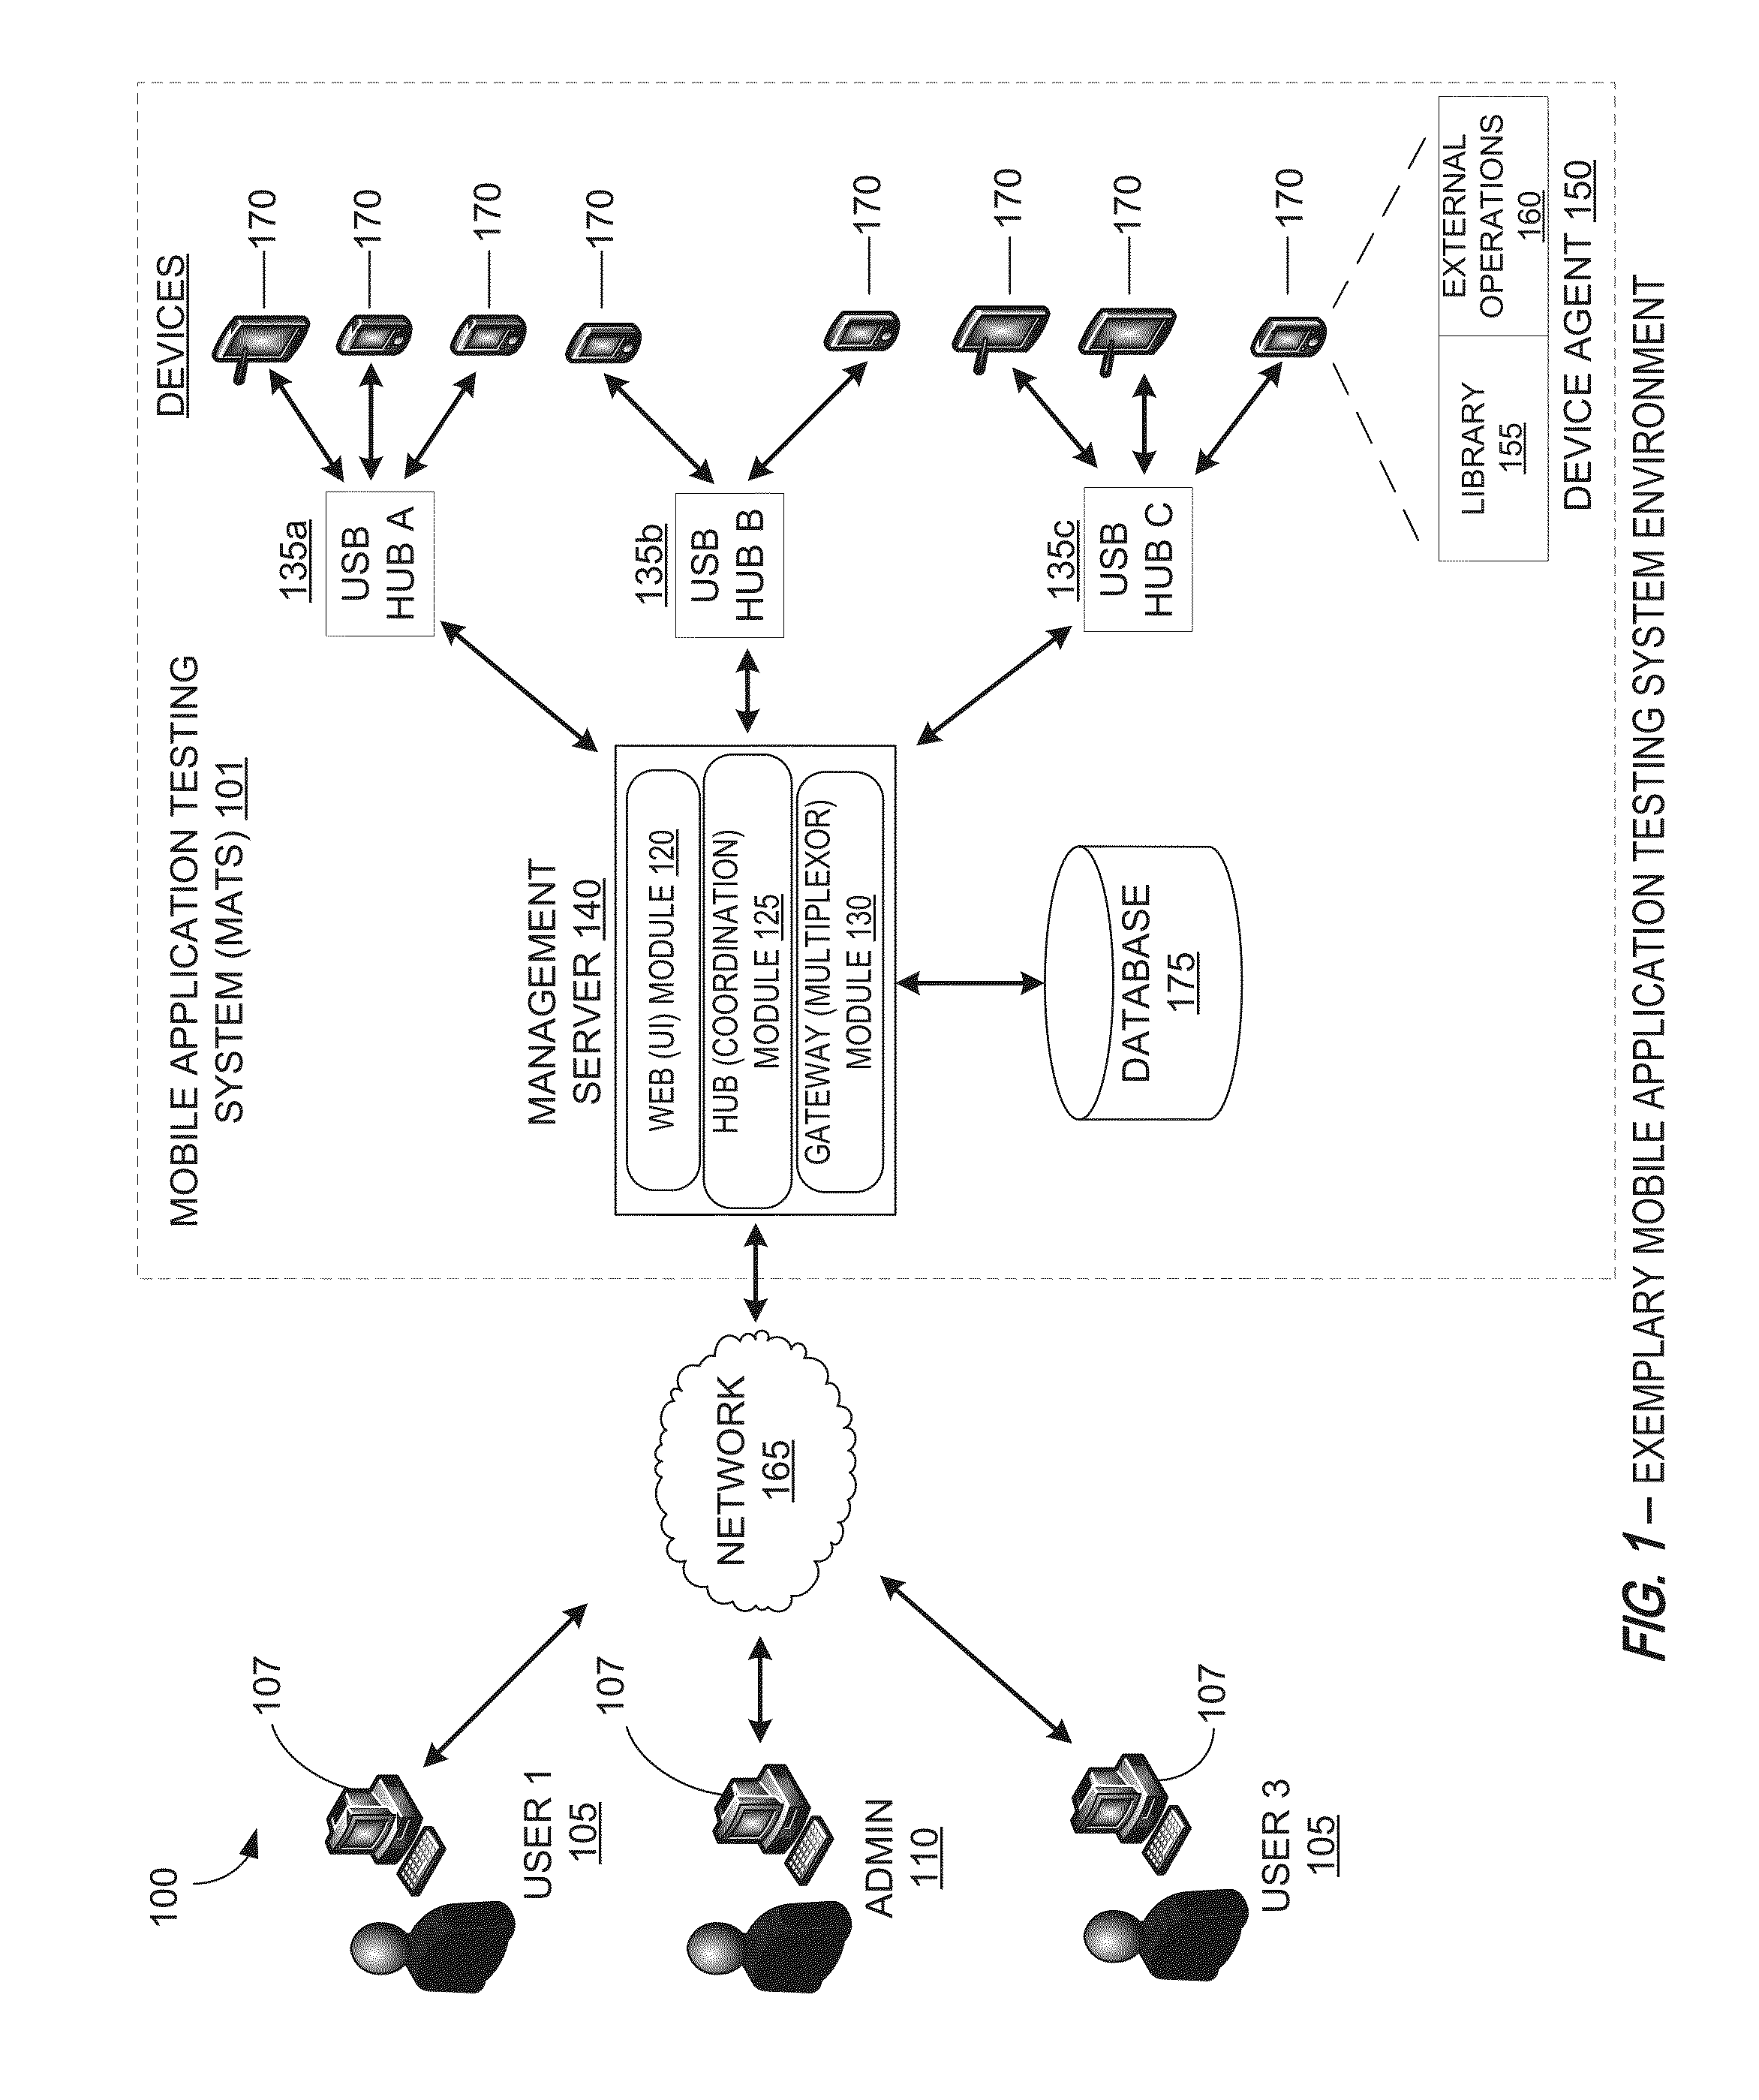 Systems, methods, and apparatuses for testing mobile device applications